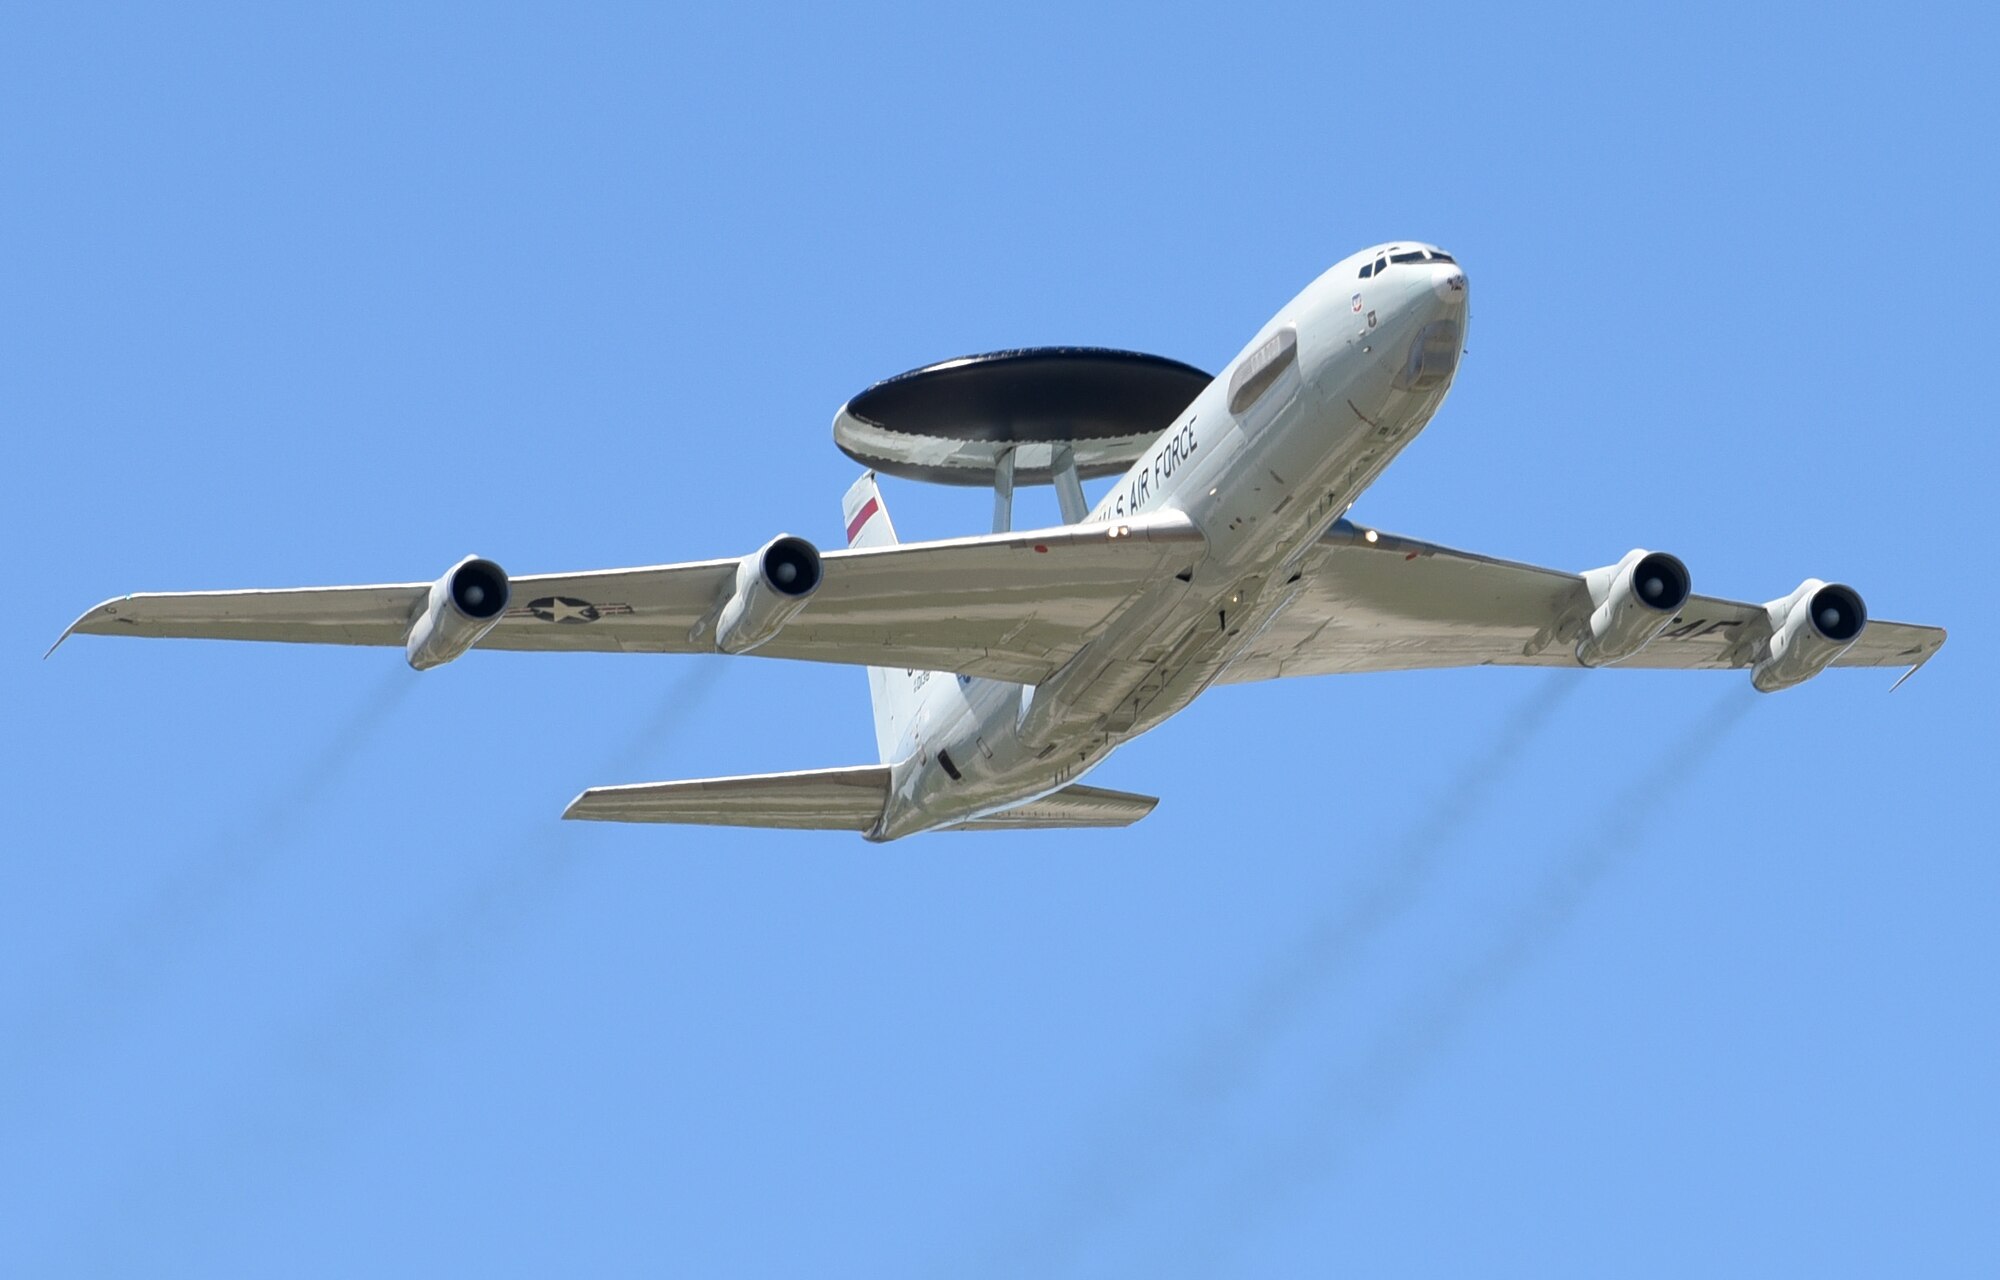 An E-3 Sentry from the 552nd Air Control Wing fleet flies over the blue Oklahoma skies May 20, 2017, during Tinker Air Force Base's Star Spangled Salute Air Show. The E-3 was part of the program featuring other Team Tinker aircraft such as the KC-135 Stratotanker and E-6B Mercury. (Air Force photo by April McDonald)